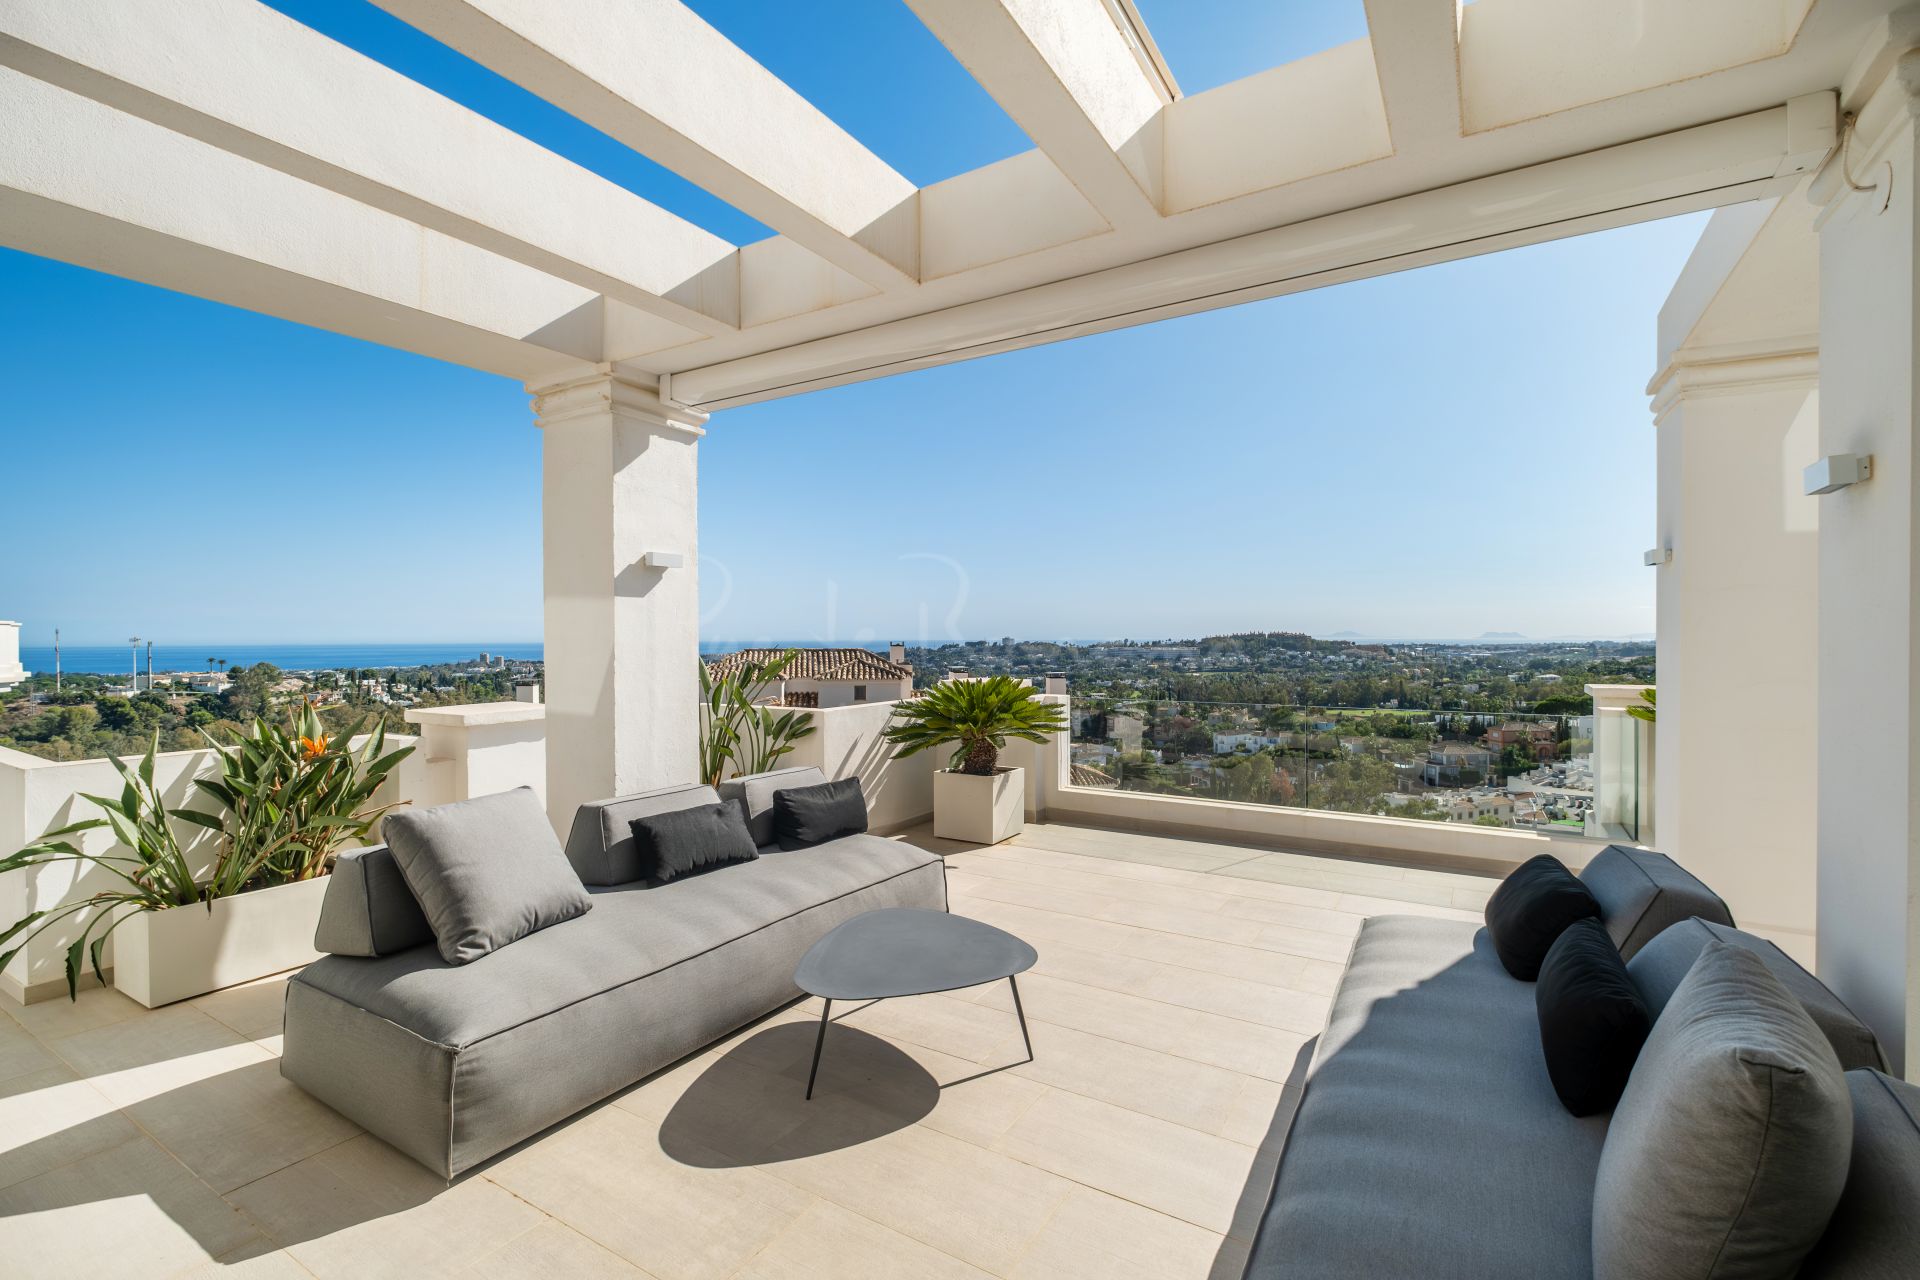 Penthouse in 9 Lions Residences, Marbella